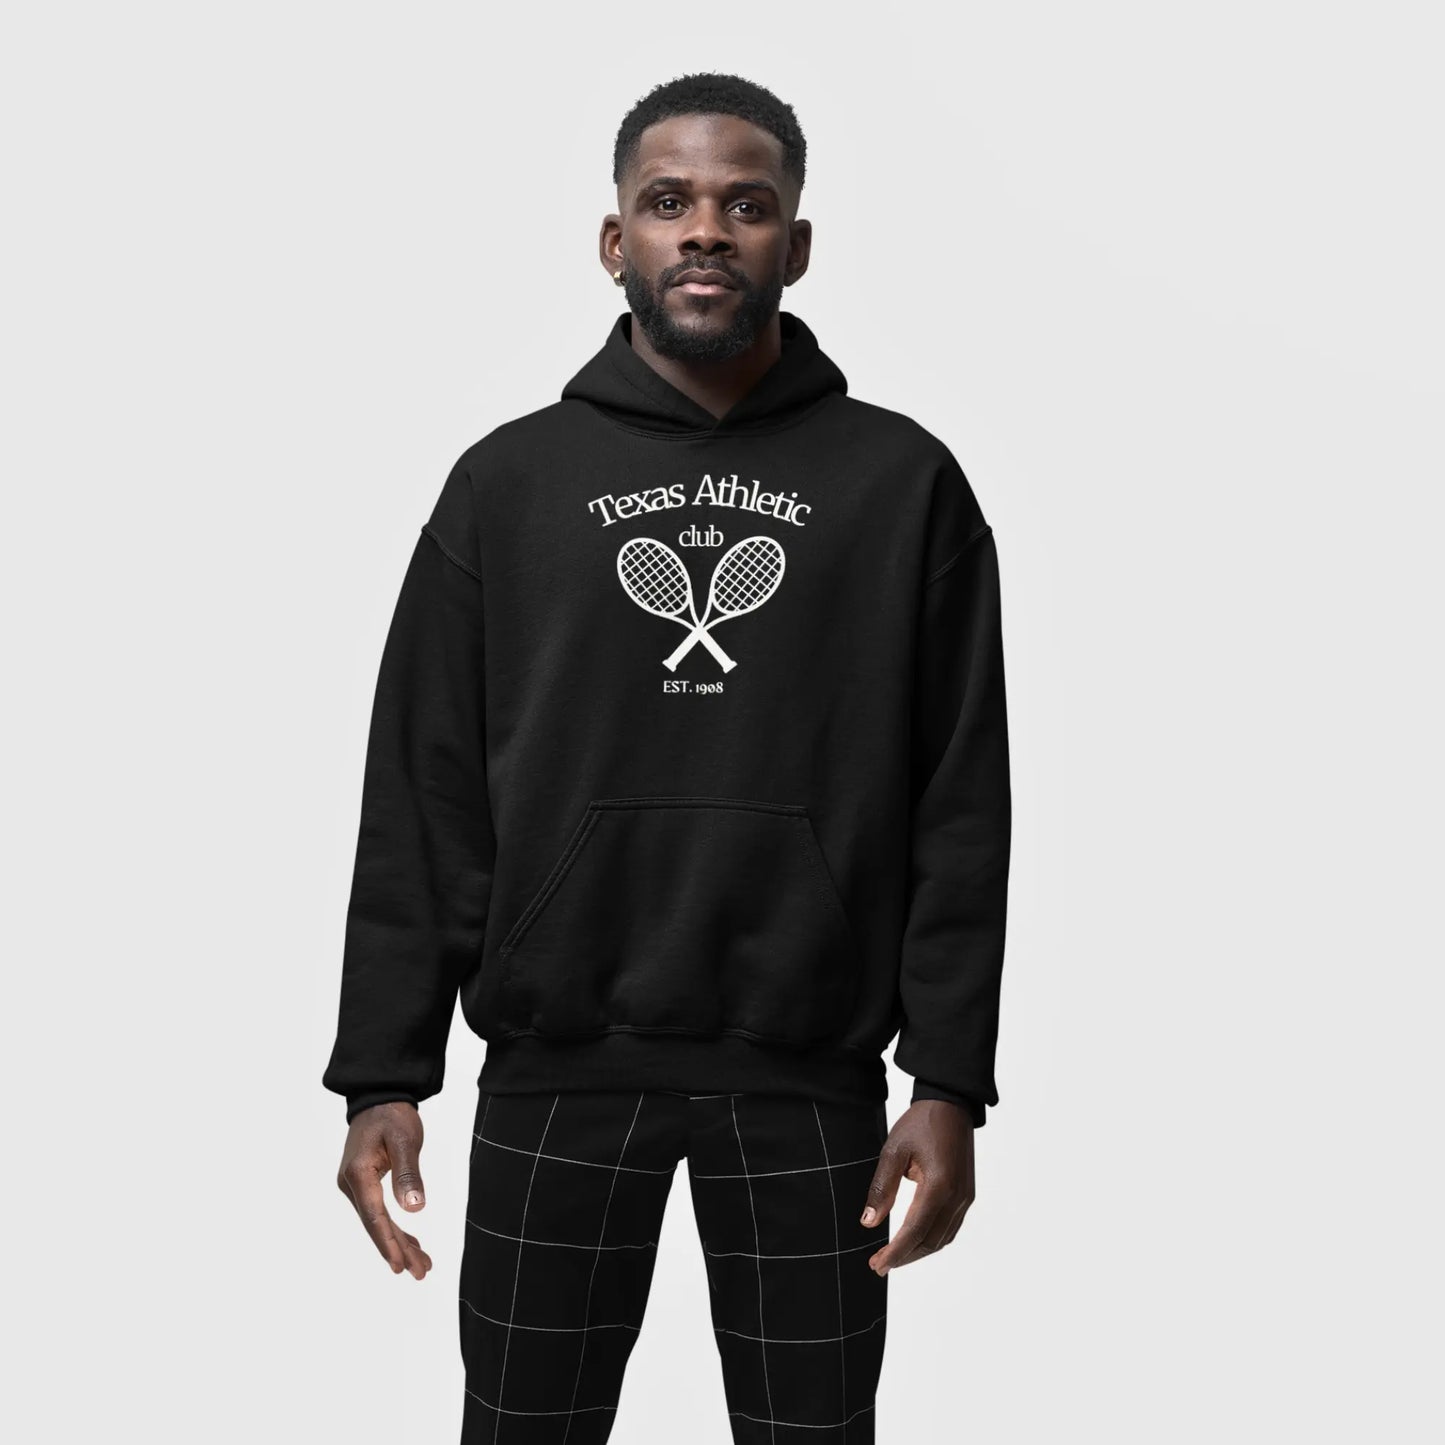 Man in a black hoodie with 'Texas Athletic Club EST. 1985' and crossed tennis rackets graphic on the front.